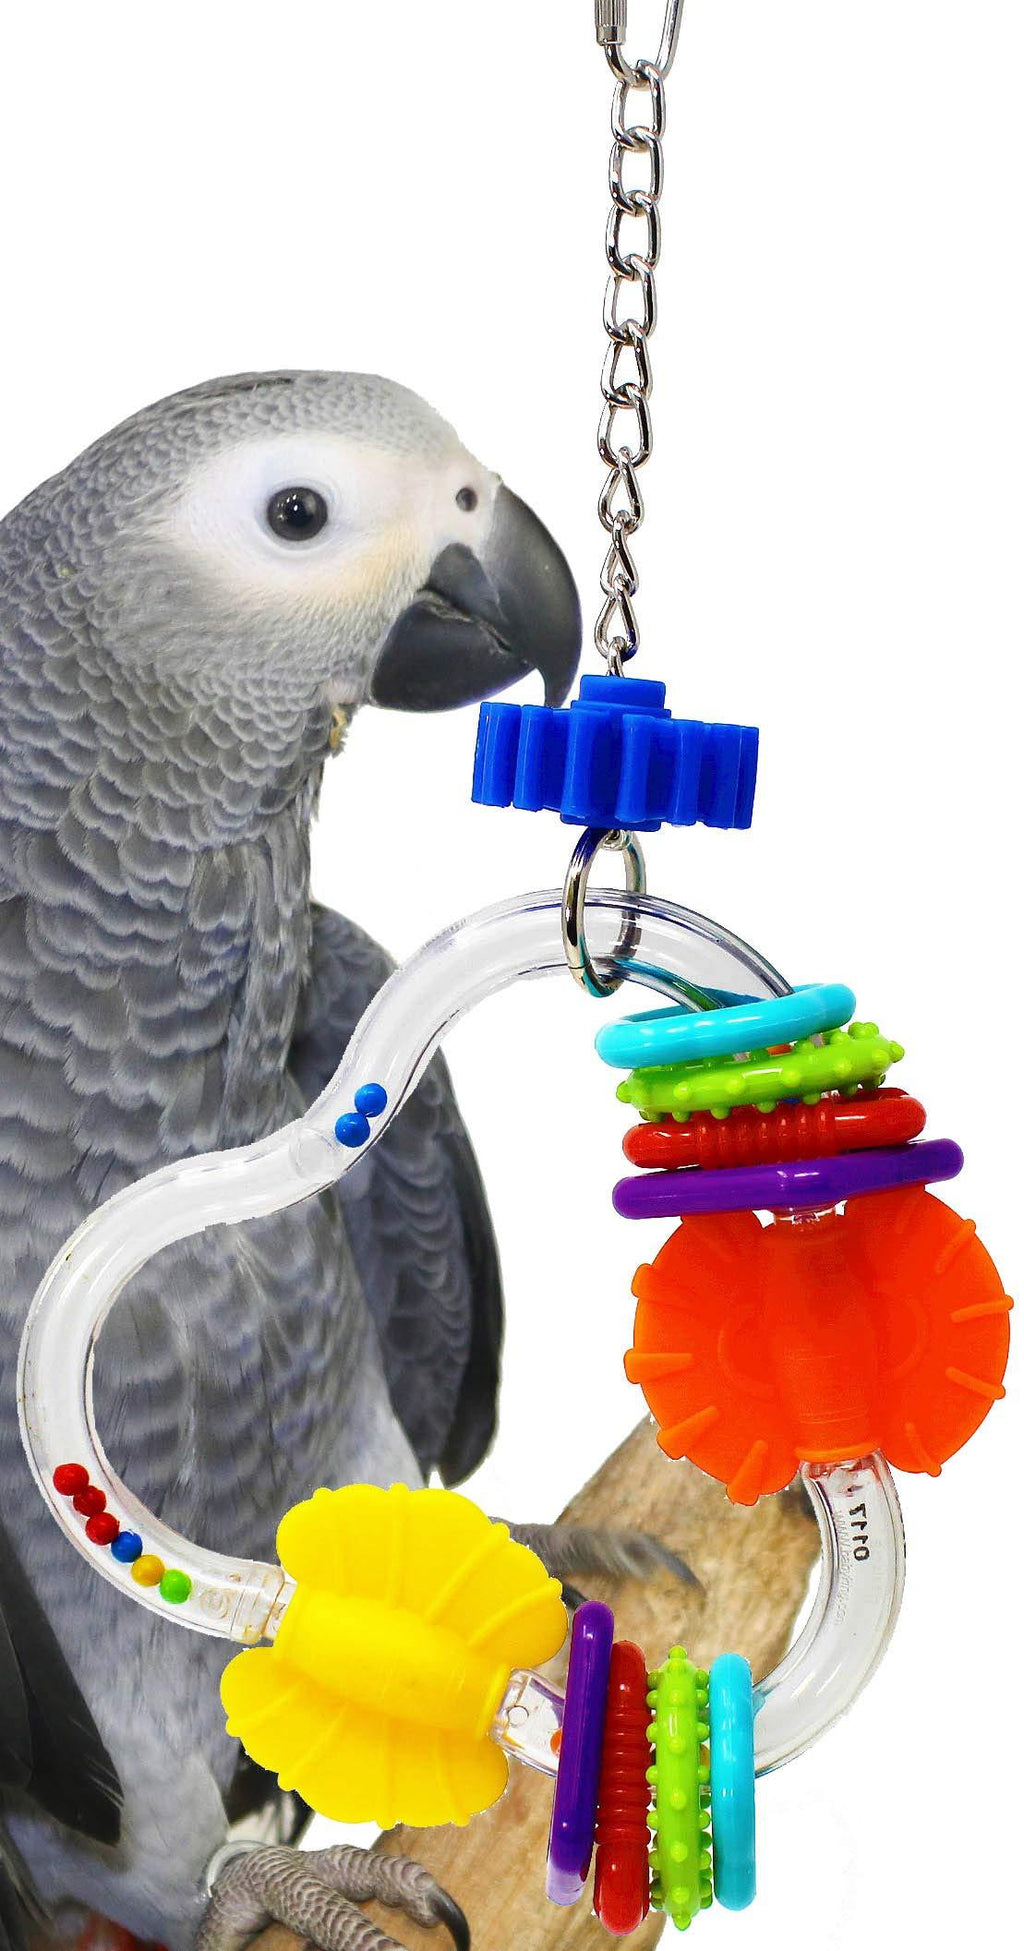 [Australia] - Bonka Bird Toys 1464 Puzzle Play Bird Toy Parrot cage Conure African Grey Acrylic Puzzle Aviary Treat Amazon Plastic chew Durable Strong Accessories Macaw Chain 